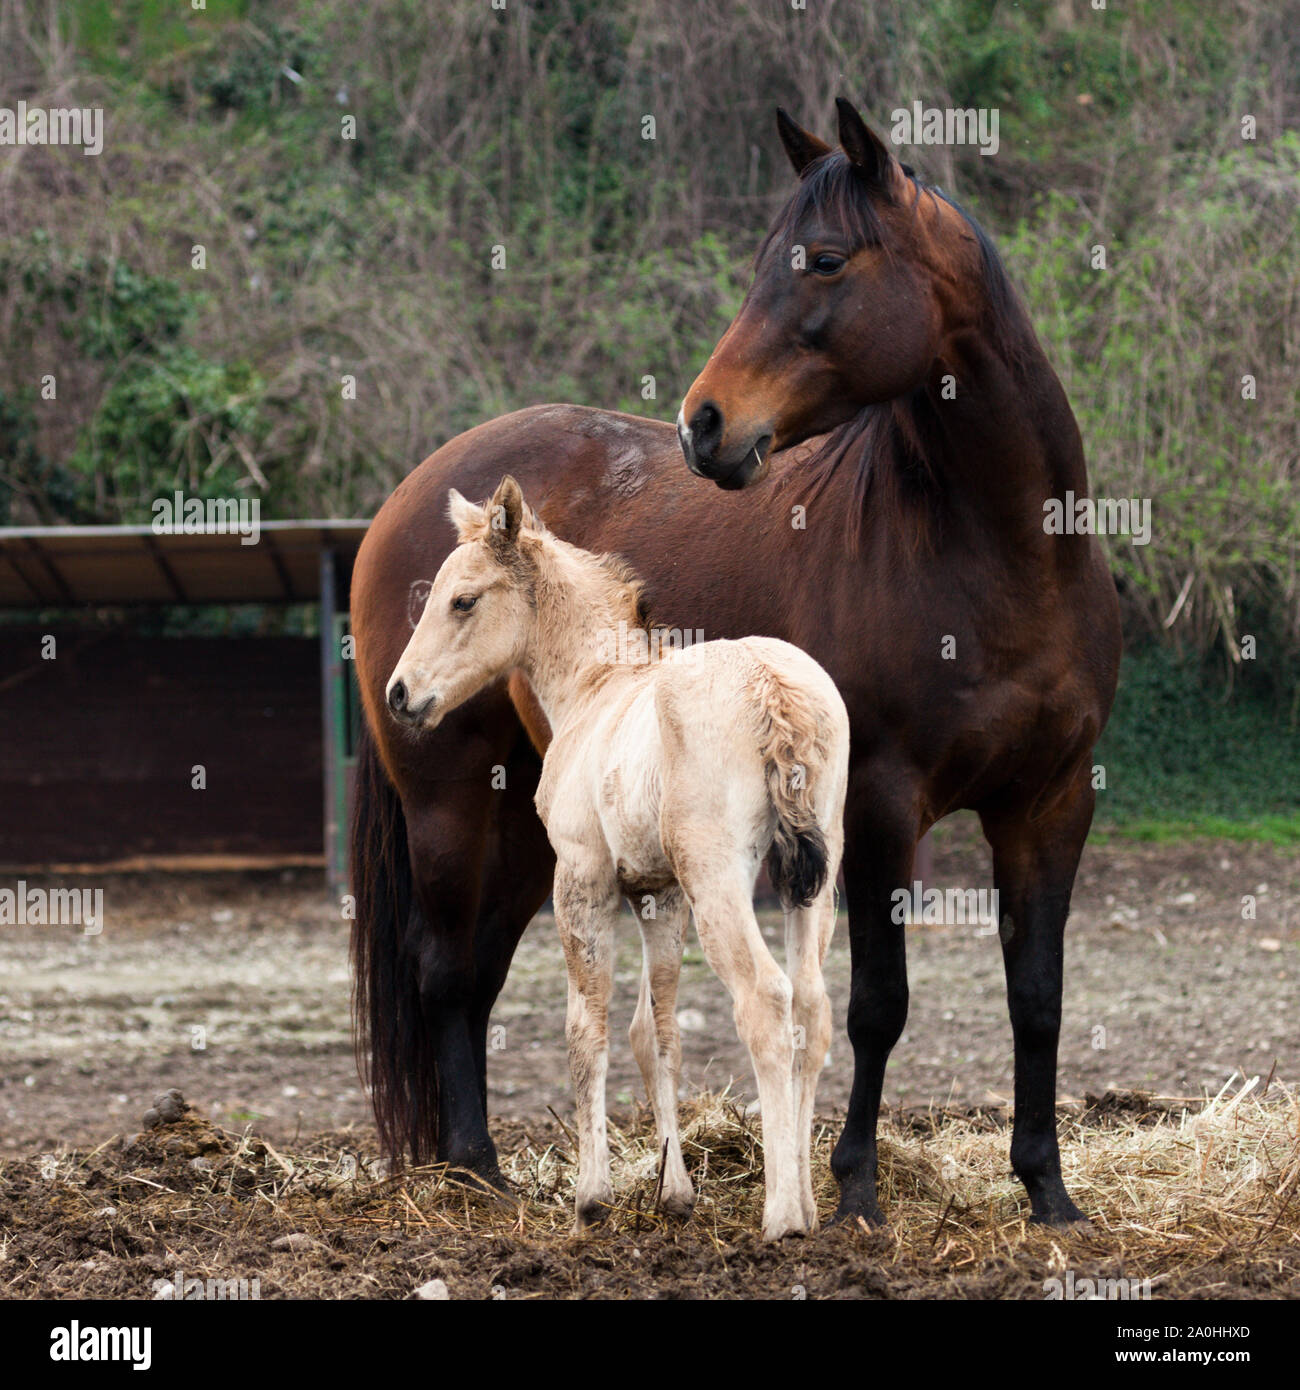 Horses Mare and foal CANON EOS 5D mktII F4.5 ISO400 EF L 100-400 mm Stock Photo